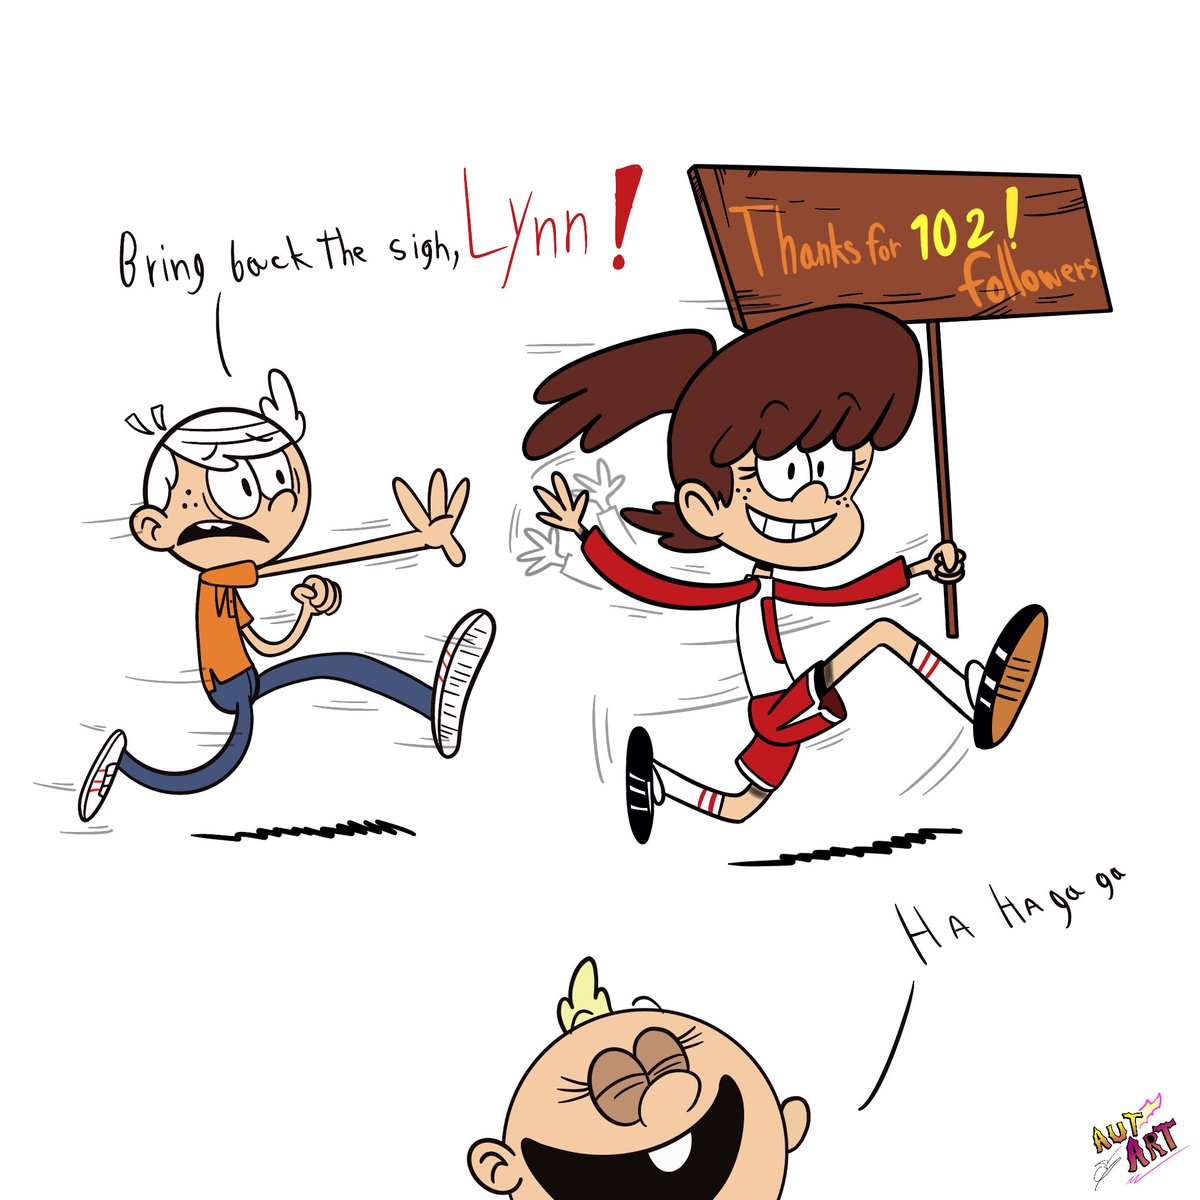 Thank for 102 followers 😊 
#TheLoudHouse  #lynnloud #Lincolnloud #lynn_loud #Lincoln_loud